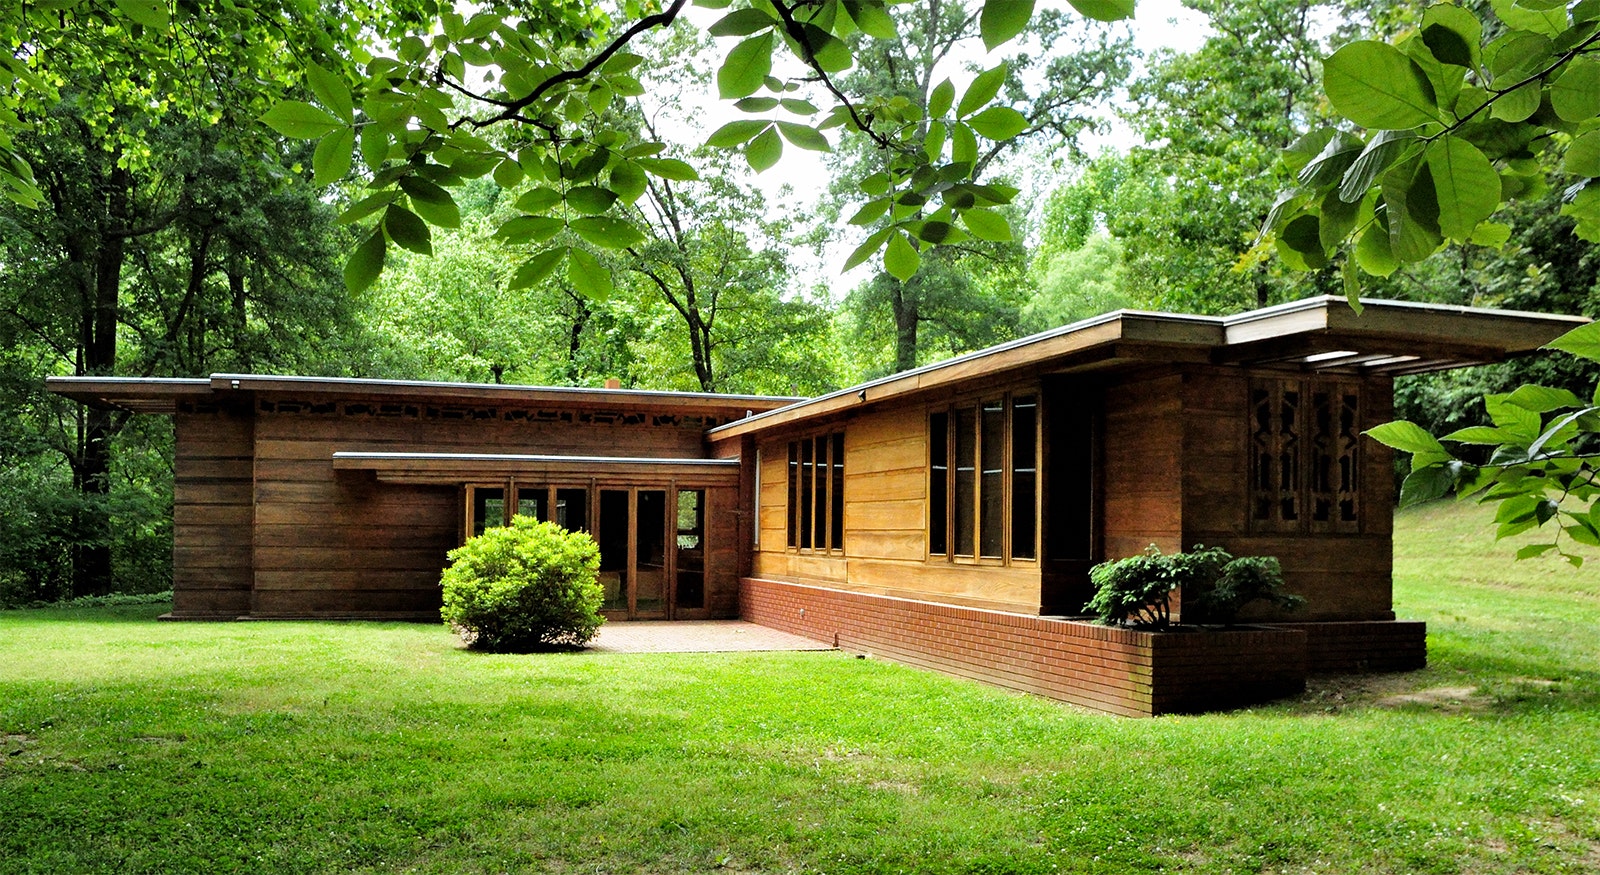 Exterior of one-story wood modernist home in a green yard shaded by trees on a summer day © dw_ross / CC-by-2.0